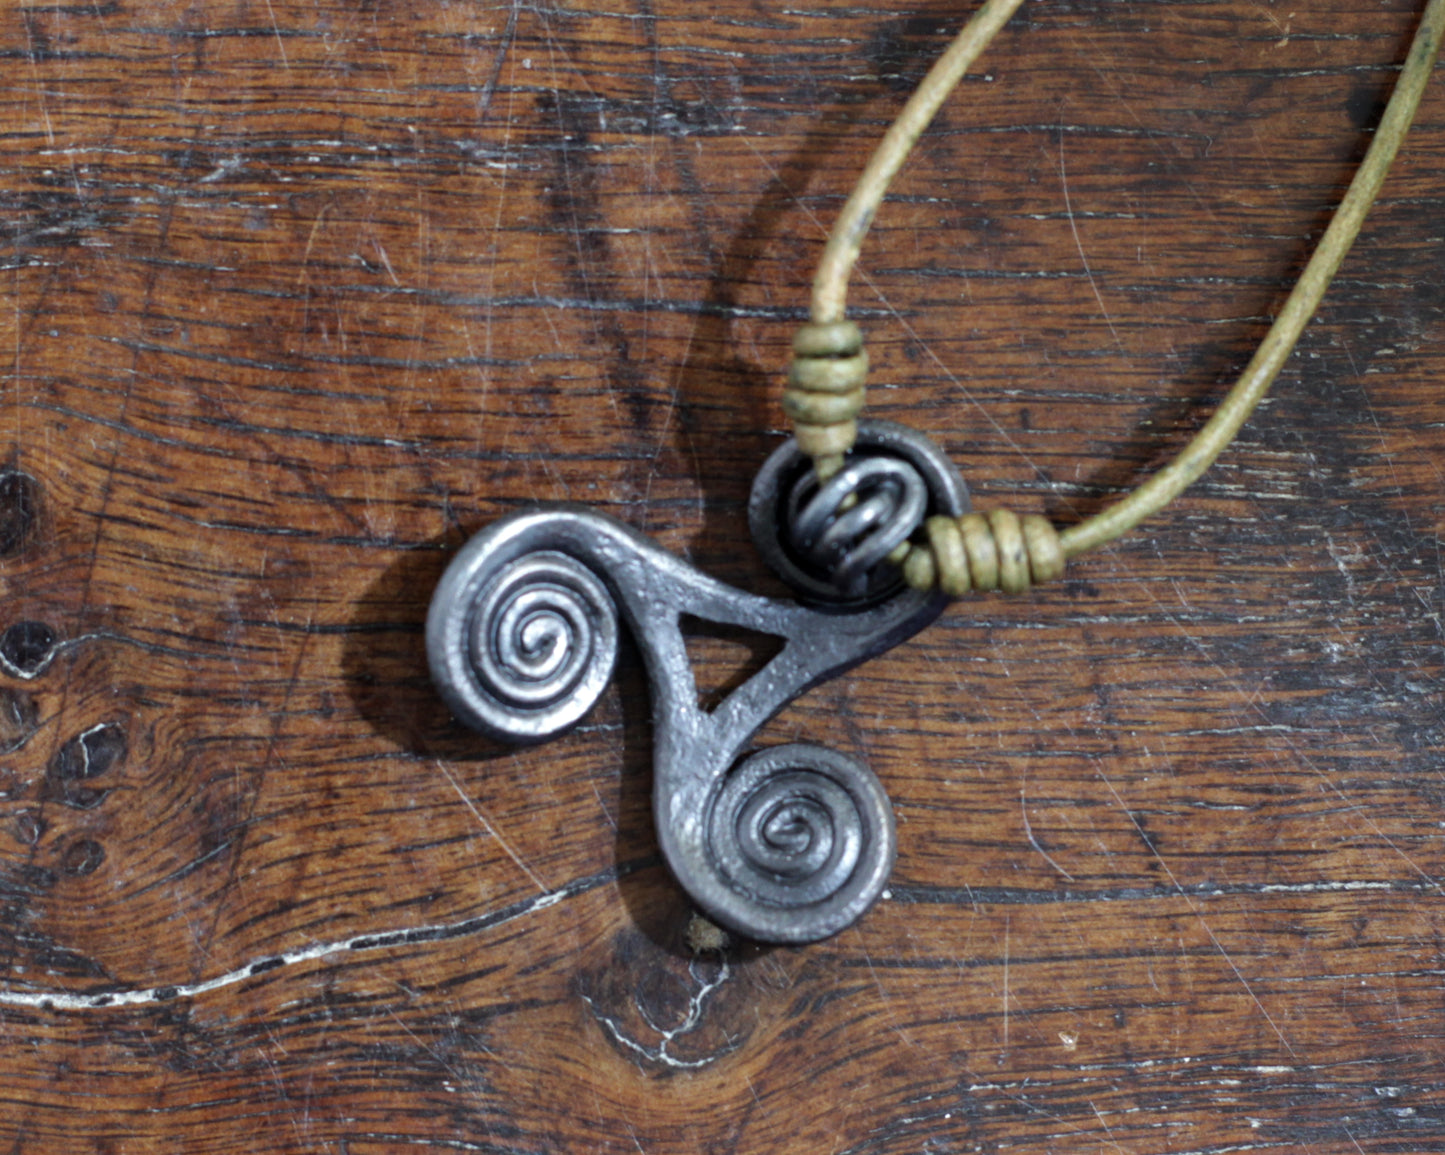 Hand Forged Iron Triskelion Necklace, designed and made by Blacksmith Marleena Barran from Taitaya Forge.  View from the back.